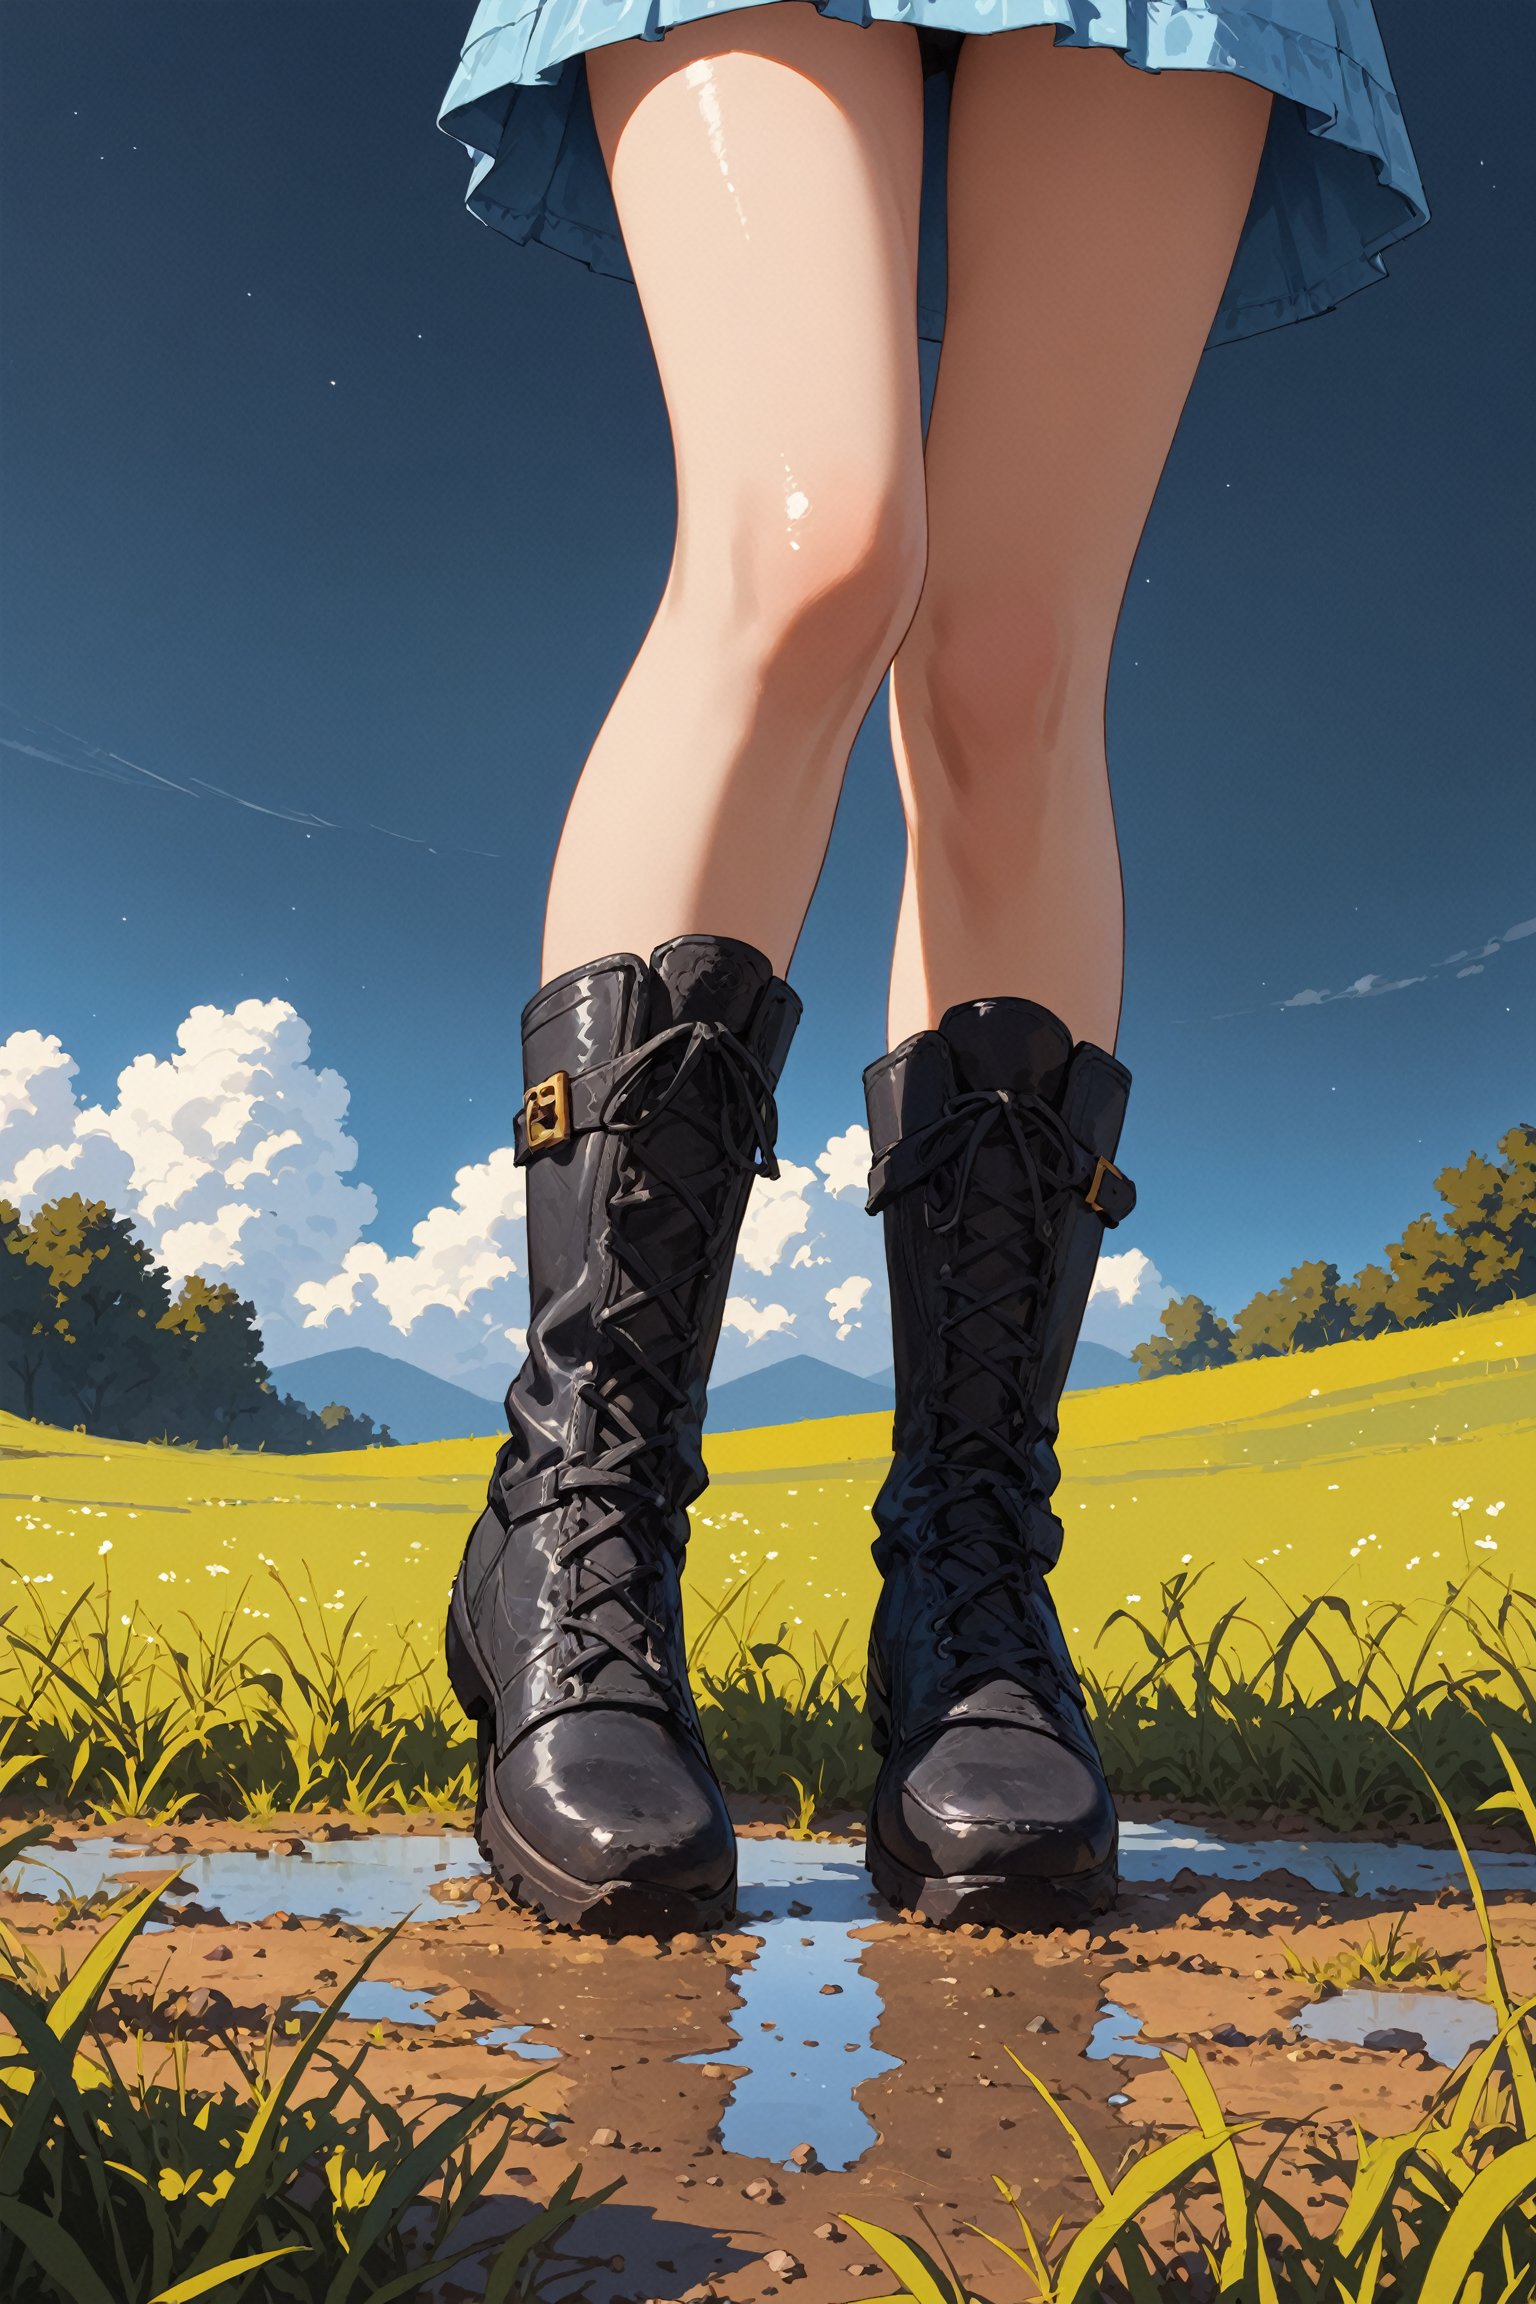 score_9, score_8_up, score_7_up, Maho Nishizumi, wearing a (pastel) raincoat and (intricately detailed thigh high black boots with large buckles), mid air still frame, jumping into puddles on a dirt path, the path travels through a grassy field, view from a low side angle, sunny skies with gray rain clouds overhead, overcast, (translucent rainbow in the distance), focus on embellishments on black boots, close up of jumping into a puddle